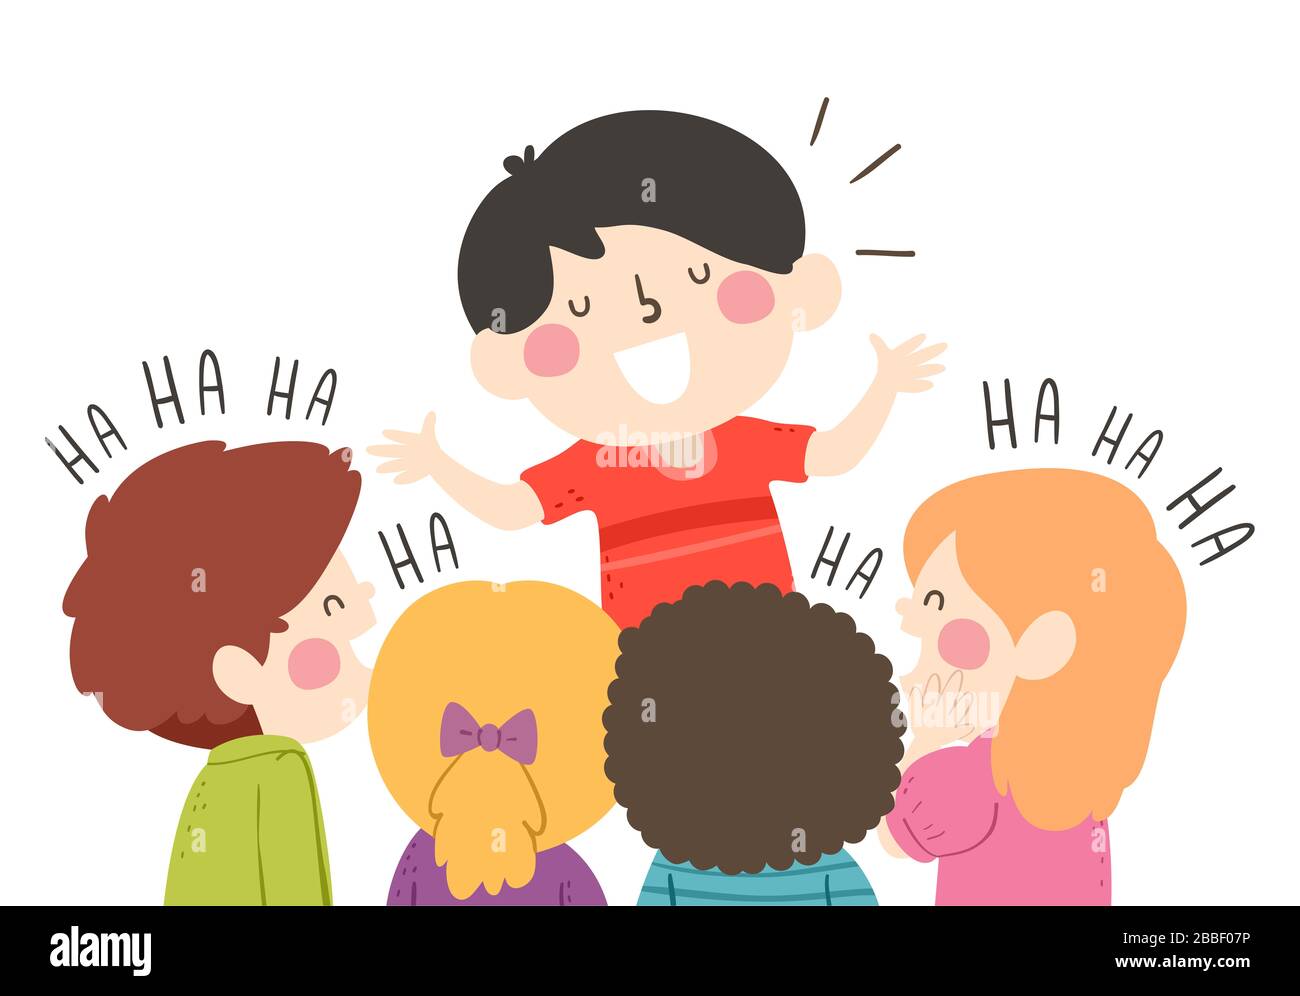 Illustration of a Kid Boy Comedian Telling Jokes to a Group of Laughing Kids Stock Photo